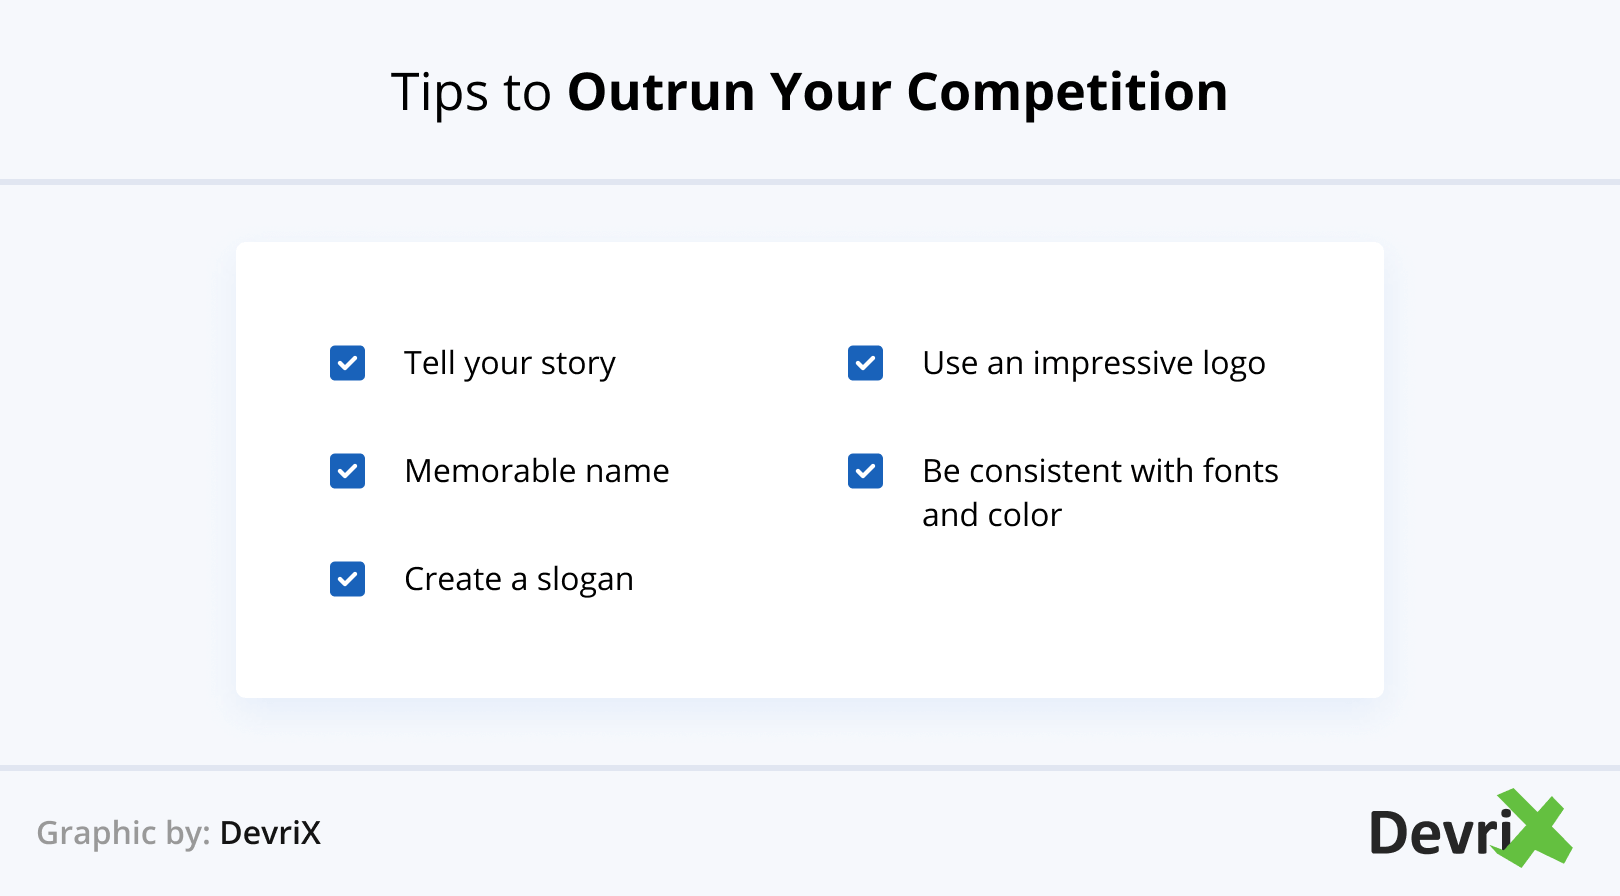 Tips to Outrun Your Competition